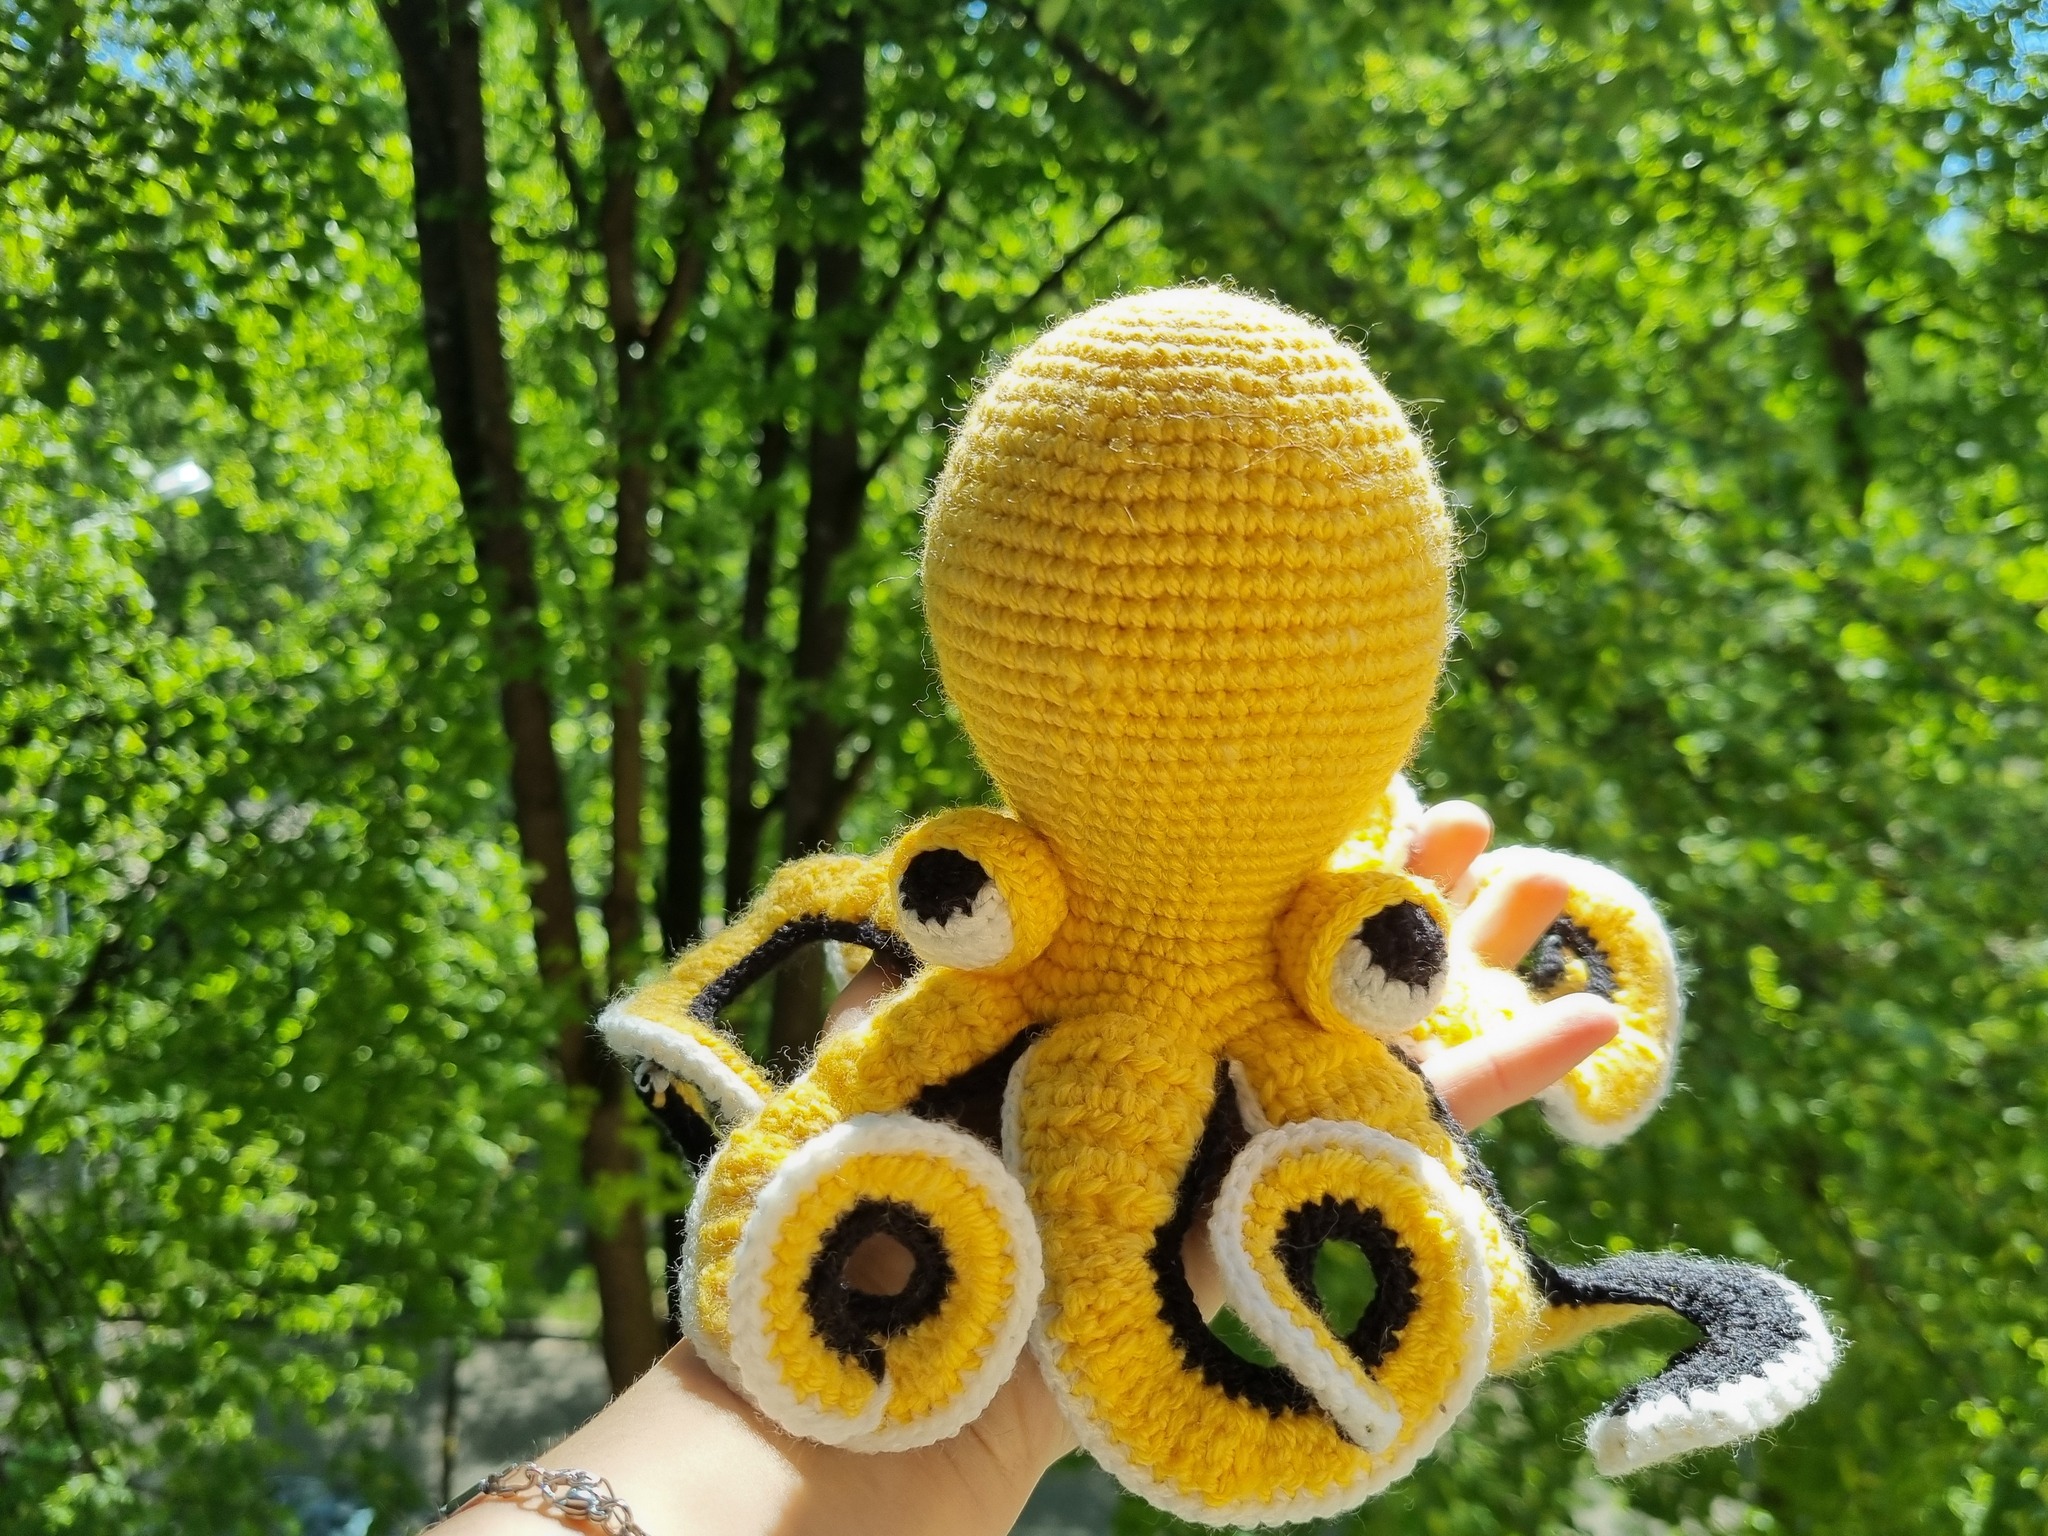 Simply Sunny Octopus - My, Knitting, Crochet, Amigurumi, Handmade, Toys, With your own hands, Needlework, Needlework without process, Creation, Yarn, Hook, Octopus, Soft toy, Presents, Hobby, Work, Longpost